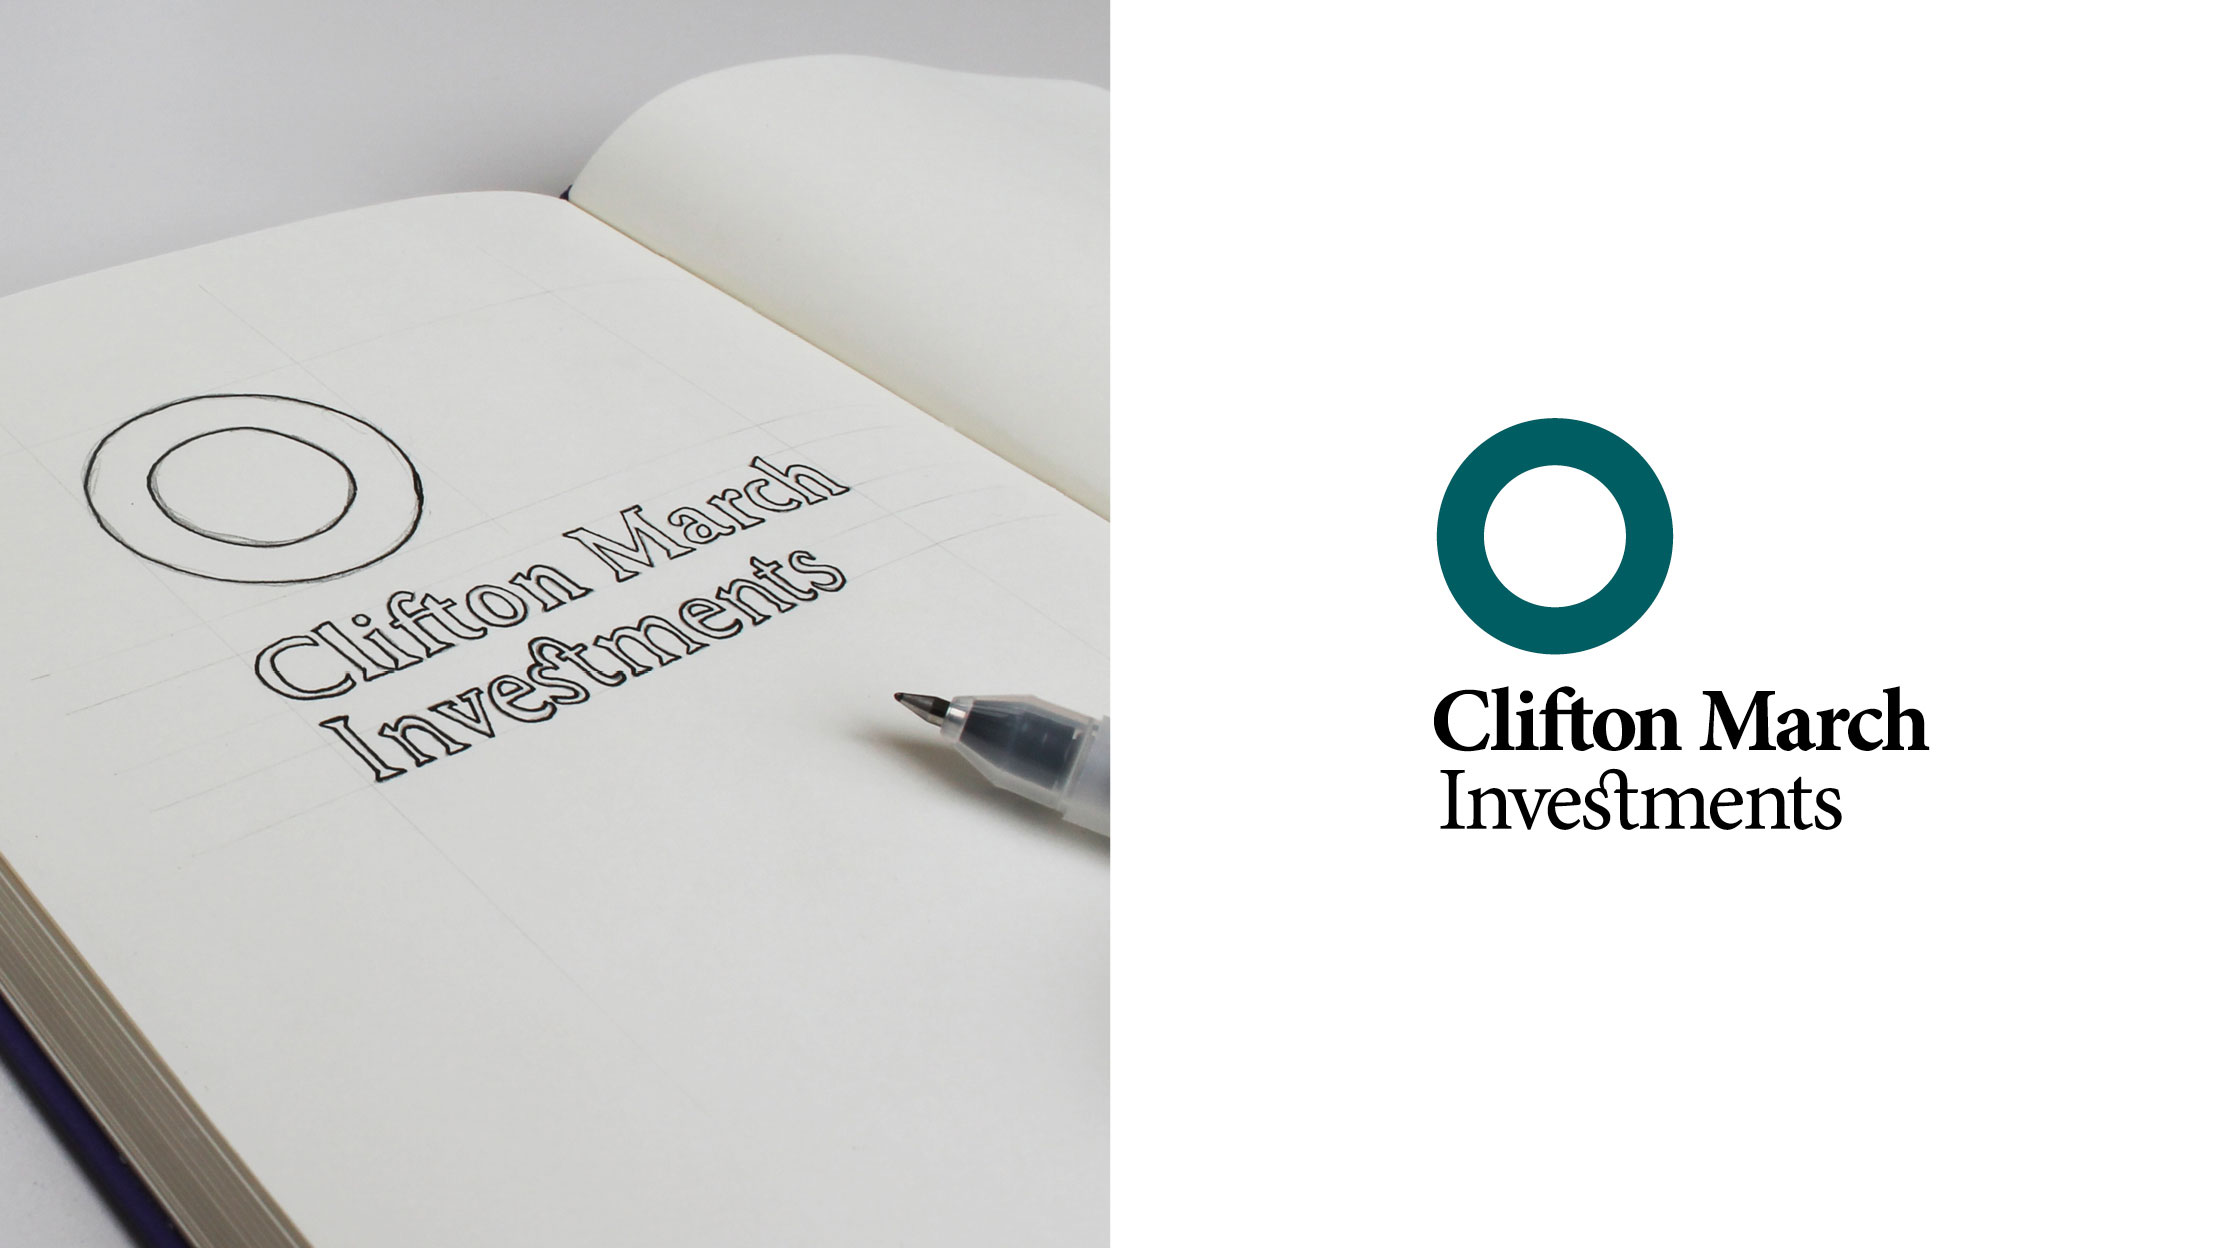 Clifton March Investment logo design